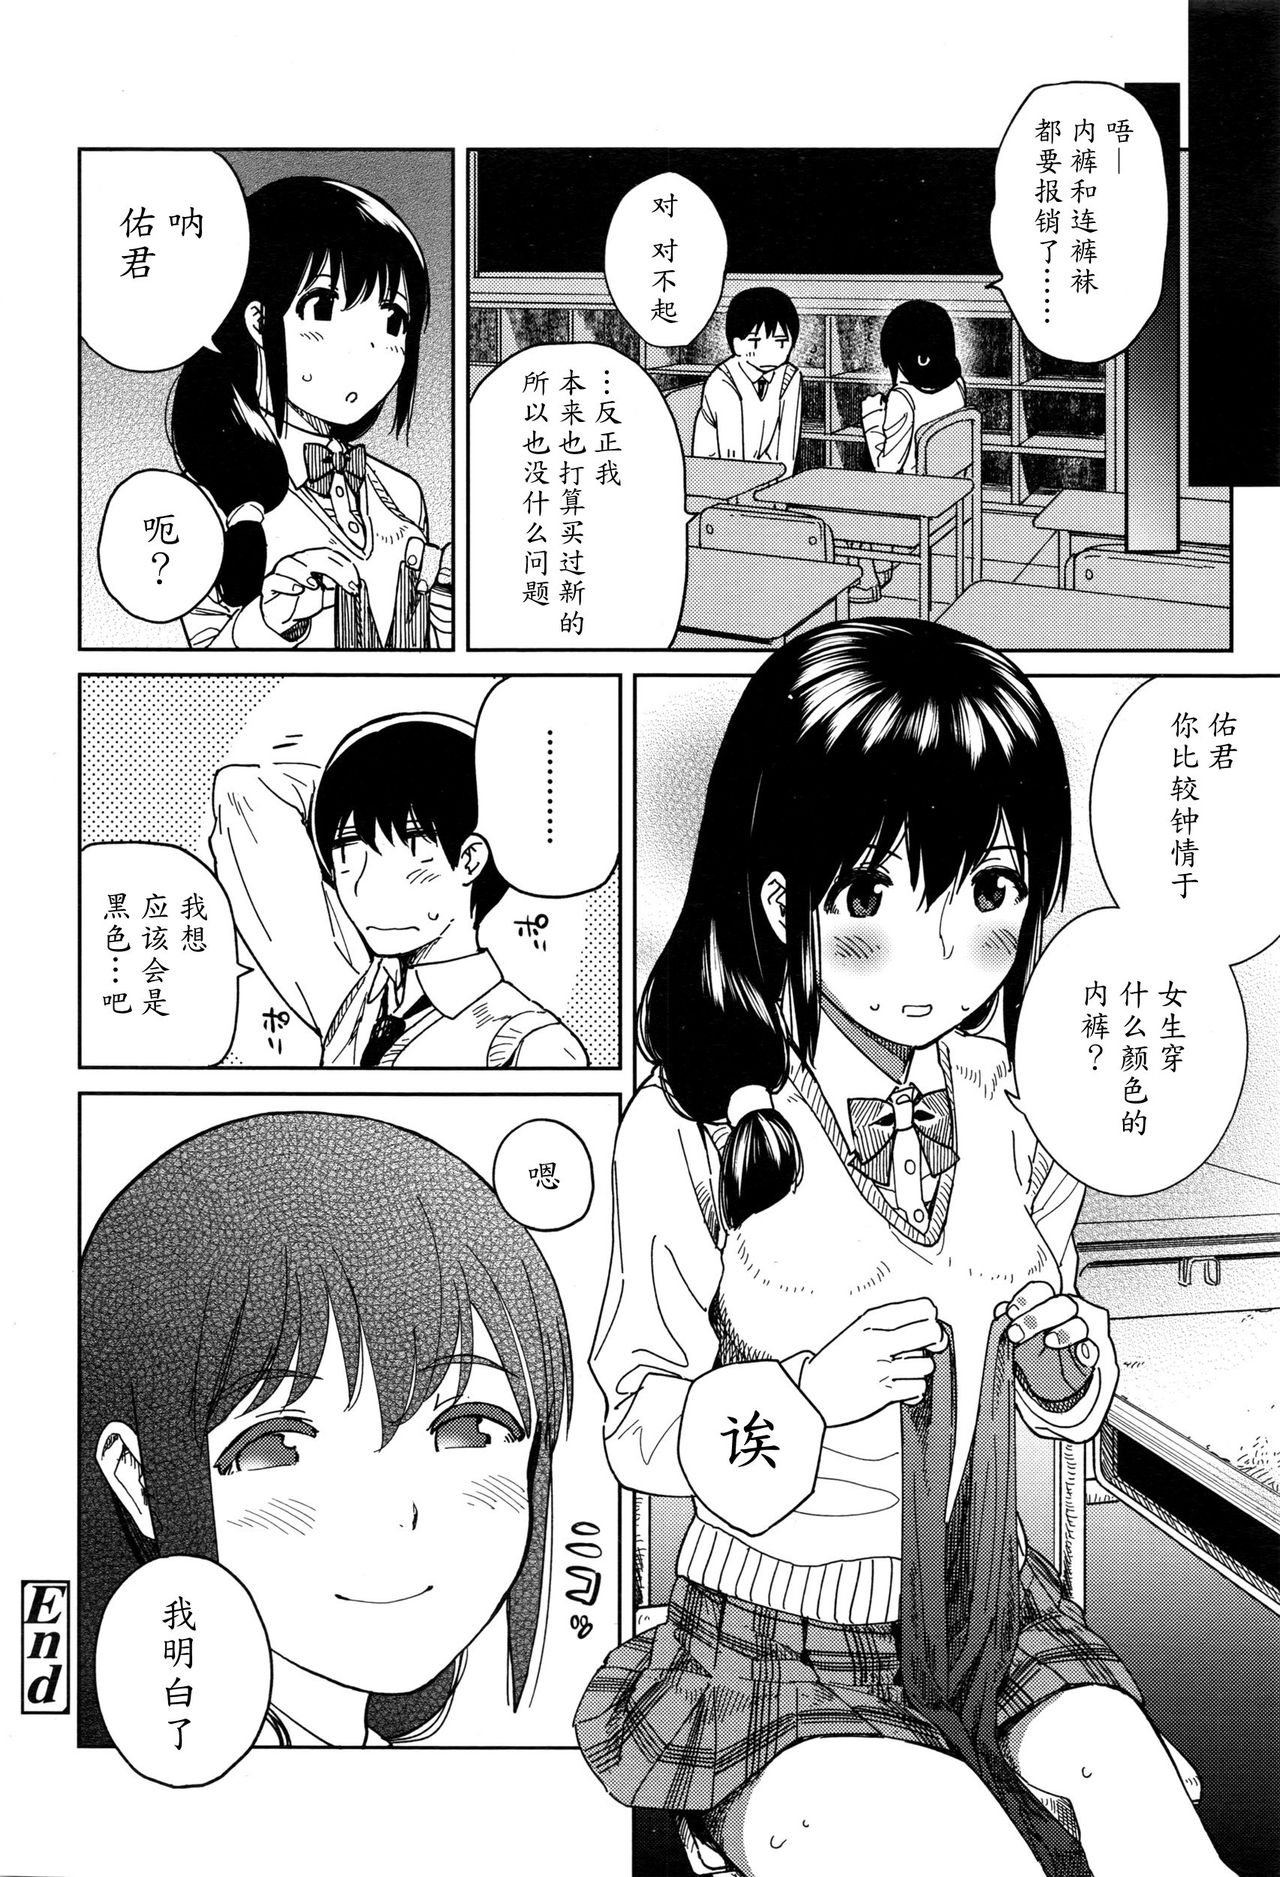 [Shiden] Houkago Rendezvous | Afterschool Rendezvous (COMIC Koh 2017-01) [Chinese] [魔劍个人汉化] [しでん] 放課後ランデブー (COMIC 高 2017年1月号) [中文翻譯]